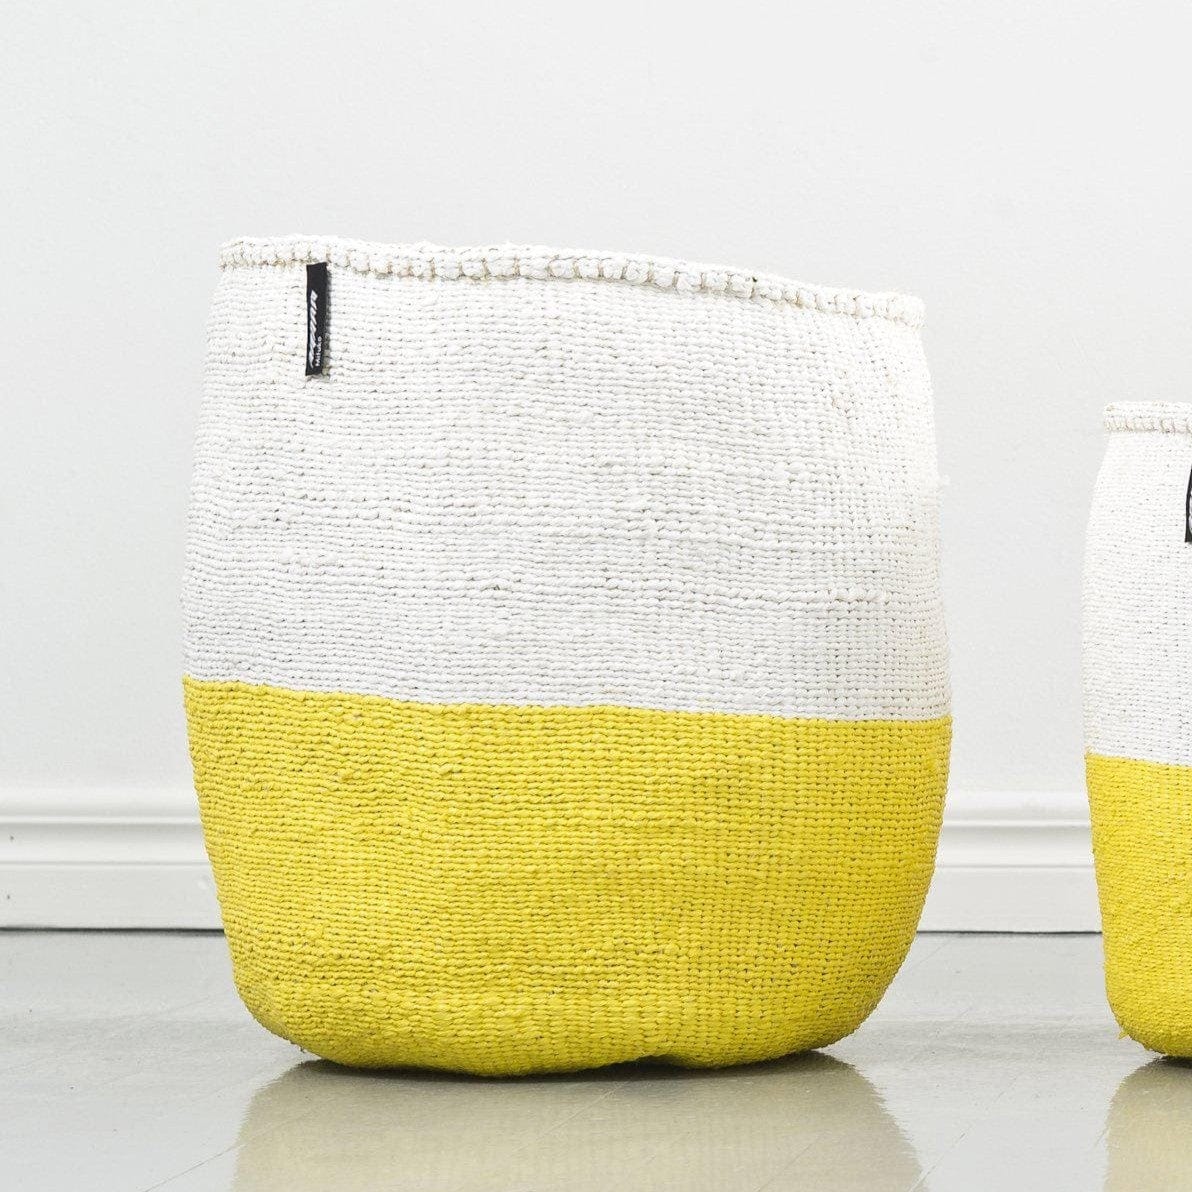 Mifuko Partly recycled plastic and sisal Medium size basket L Kiondo basket | White and yellow duo L